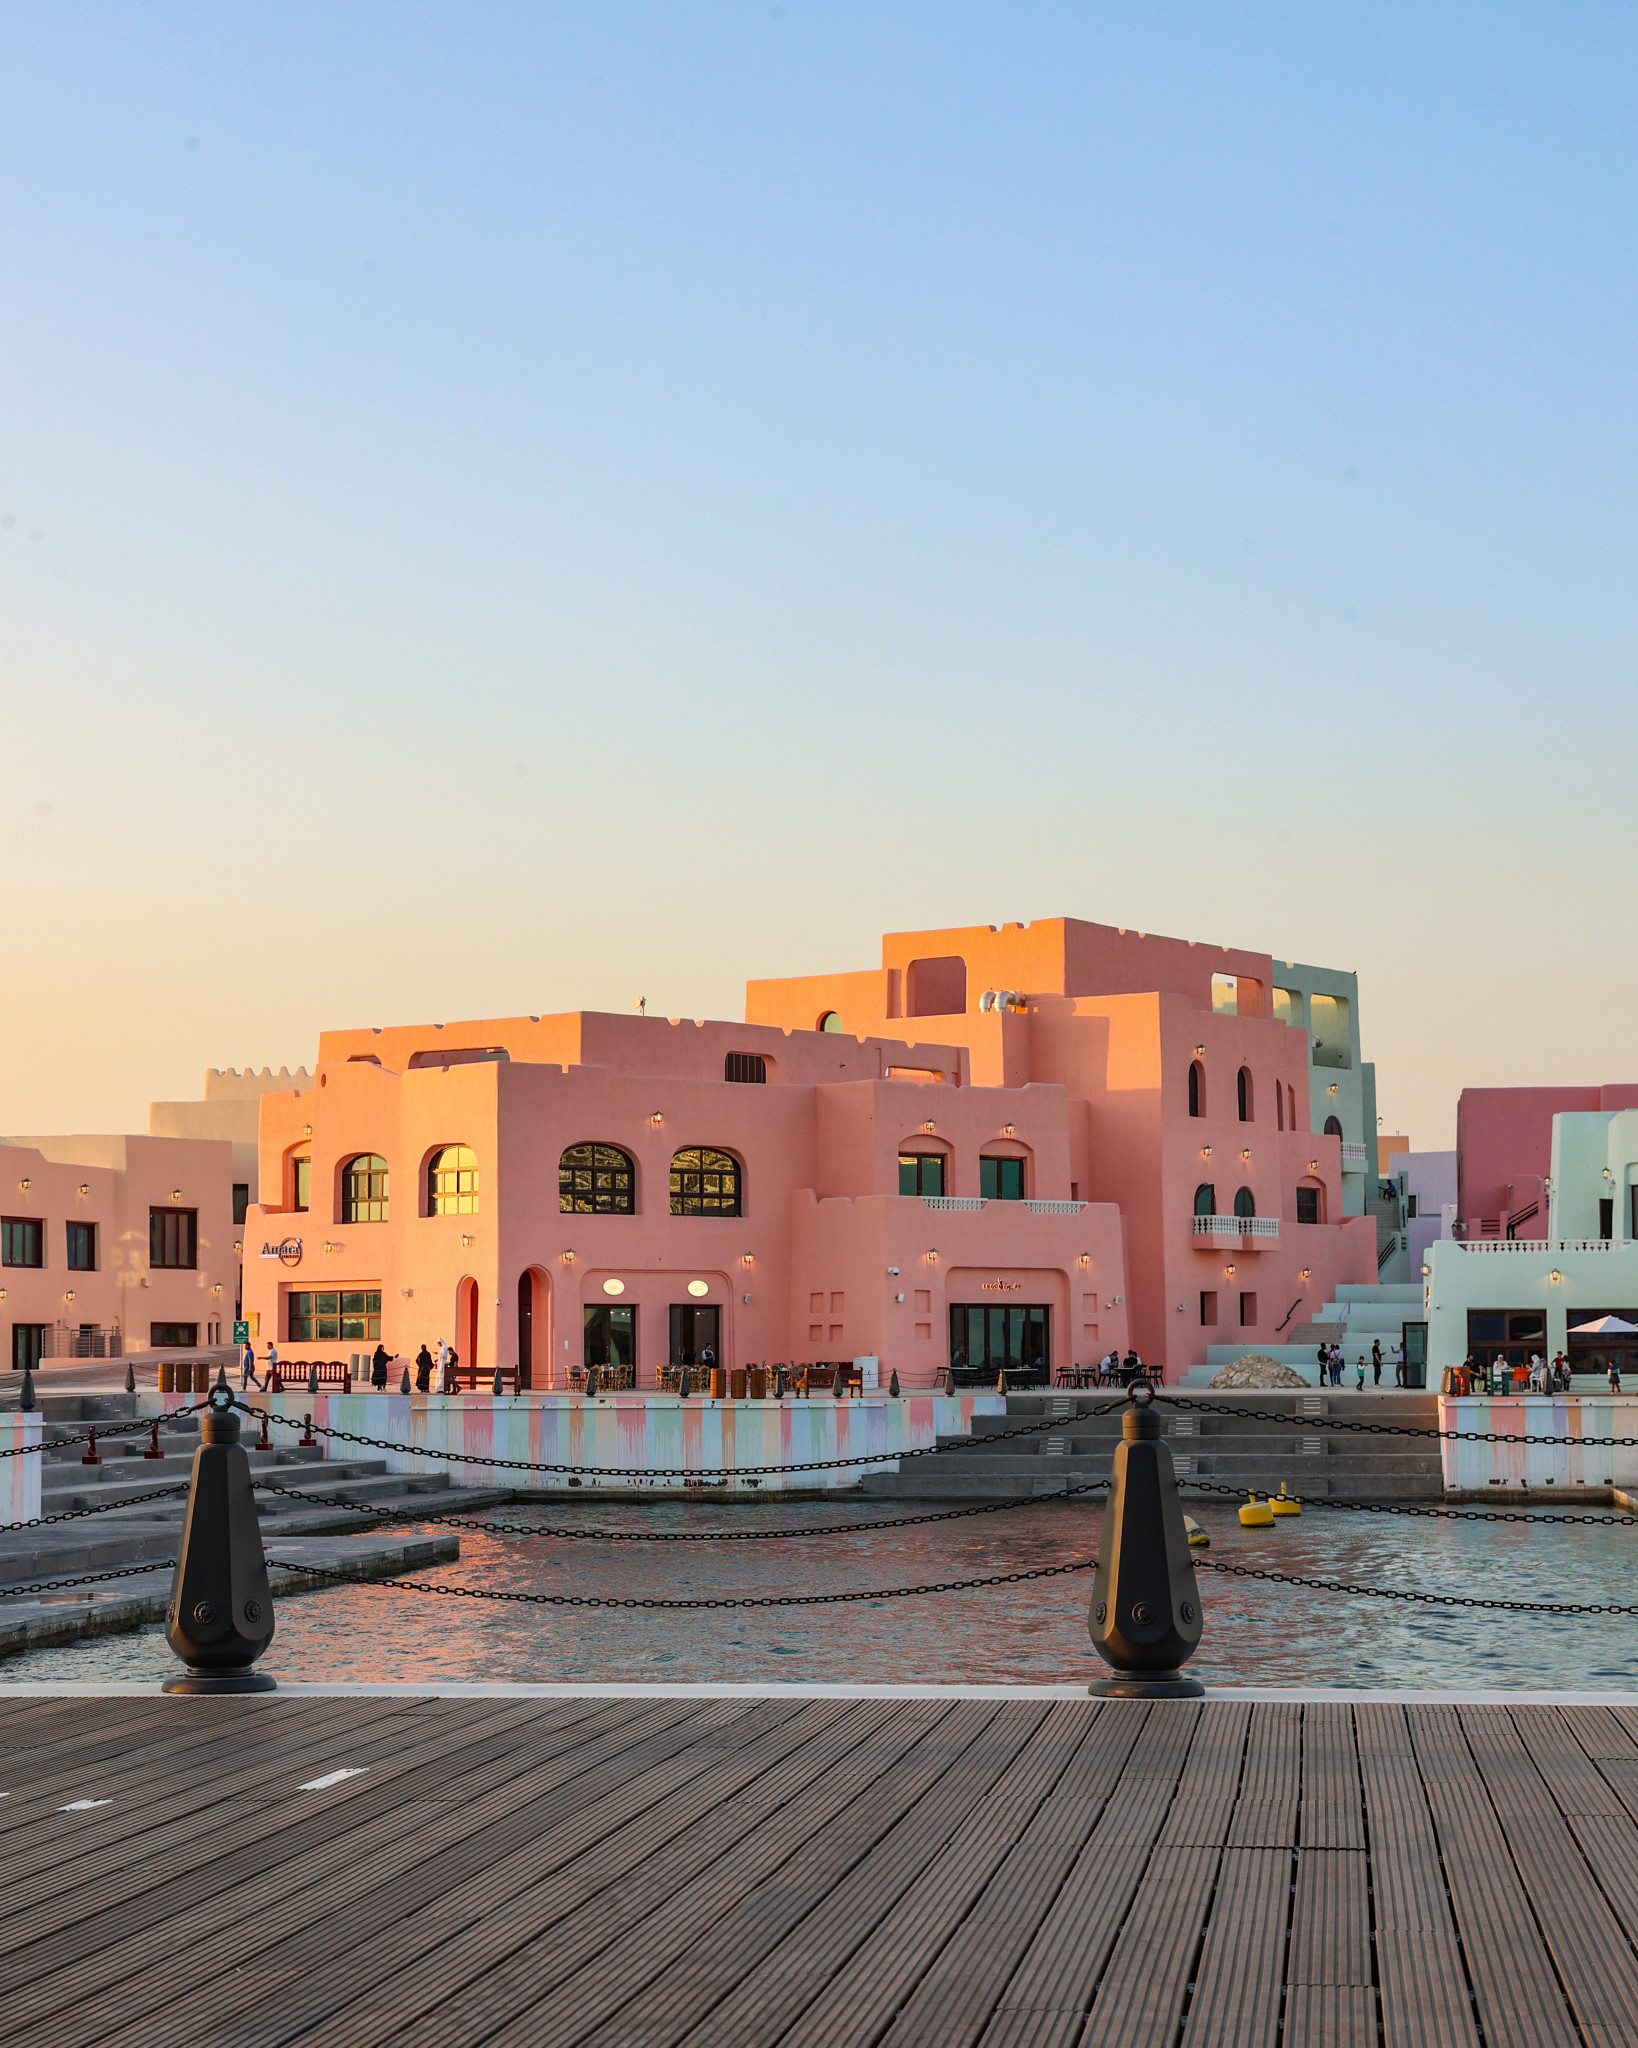 Doha's Old Port is connected to the city's iconic Souq Waqif. WORLD AQUATICS